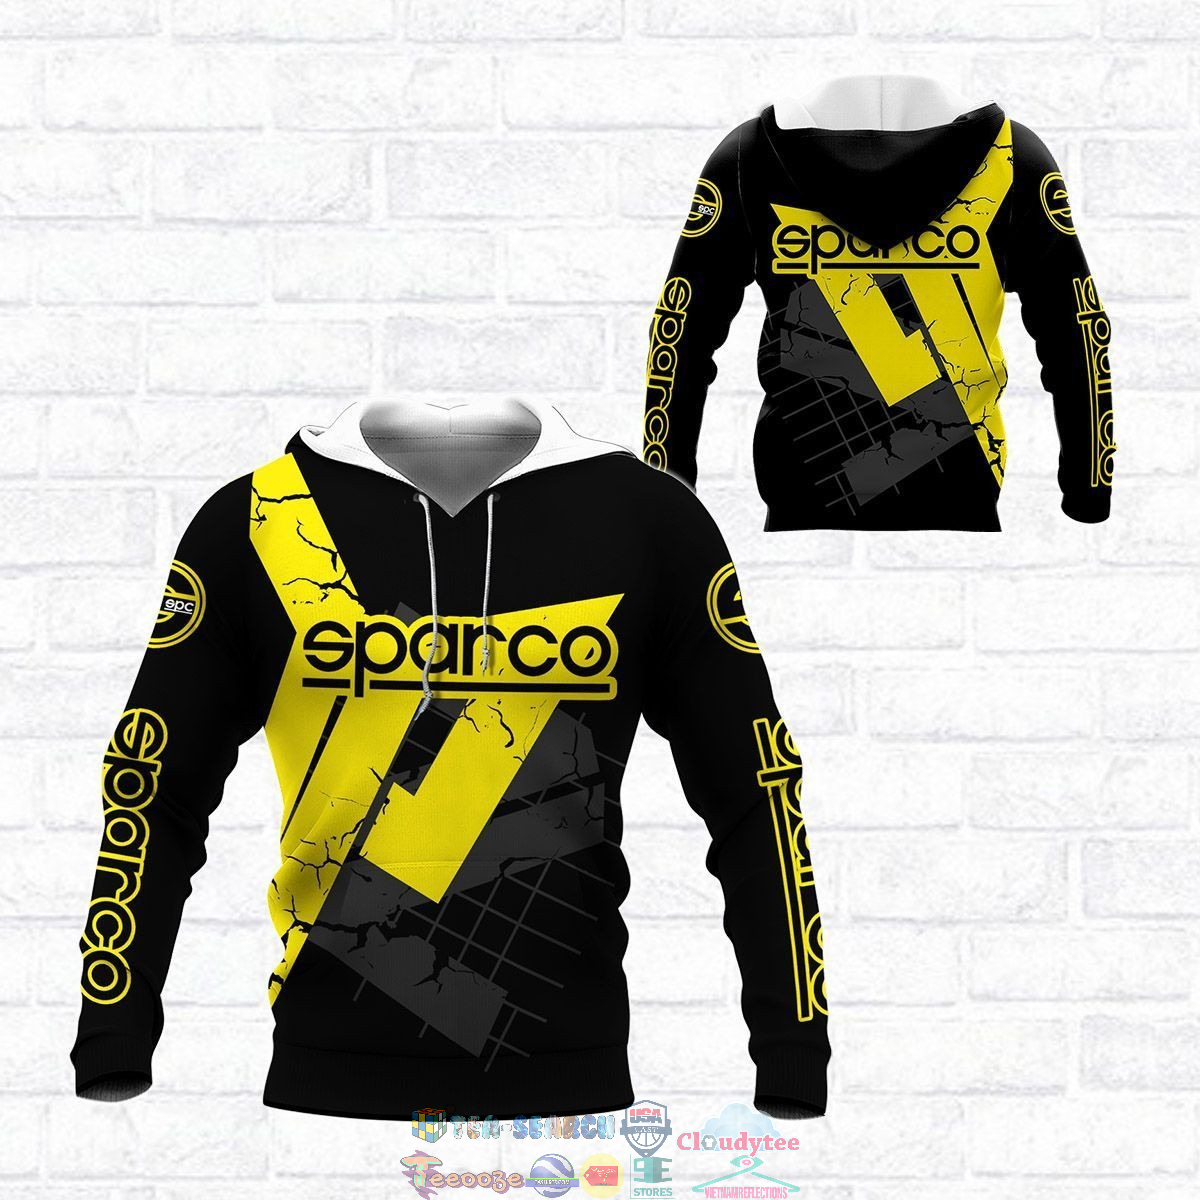 Sparco ver 7 3D hoodie and t-shirt